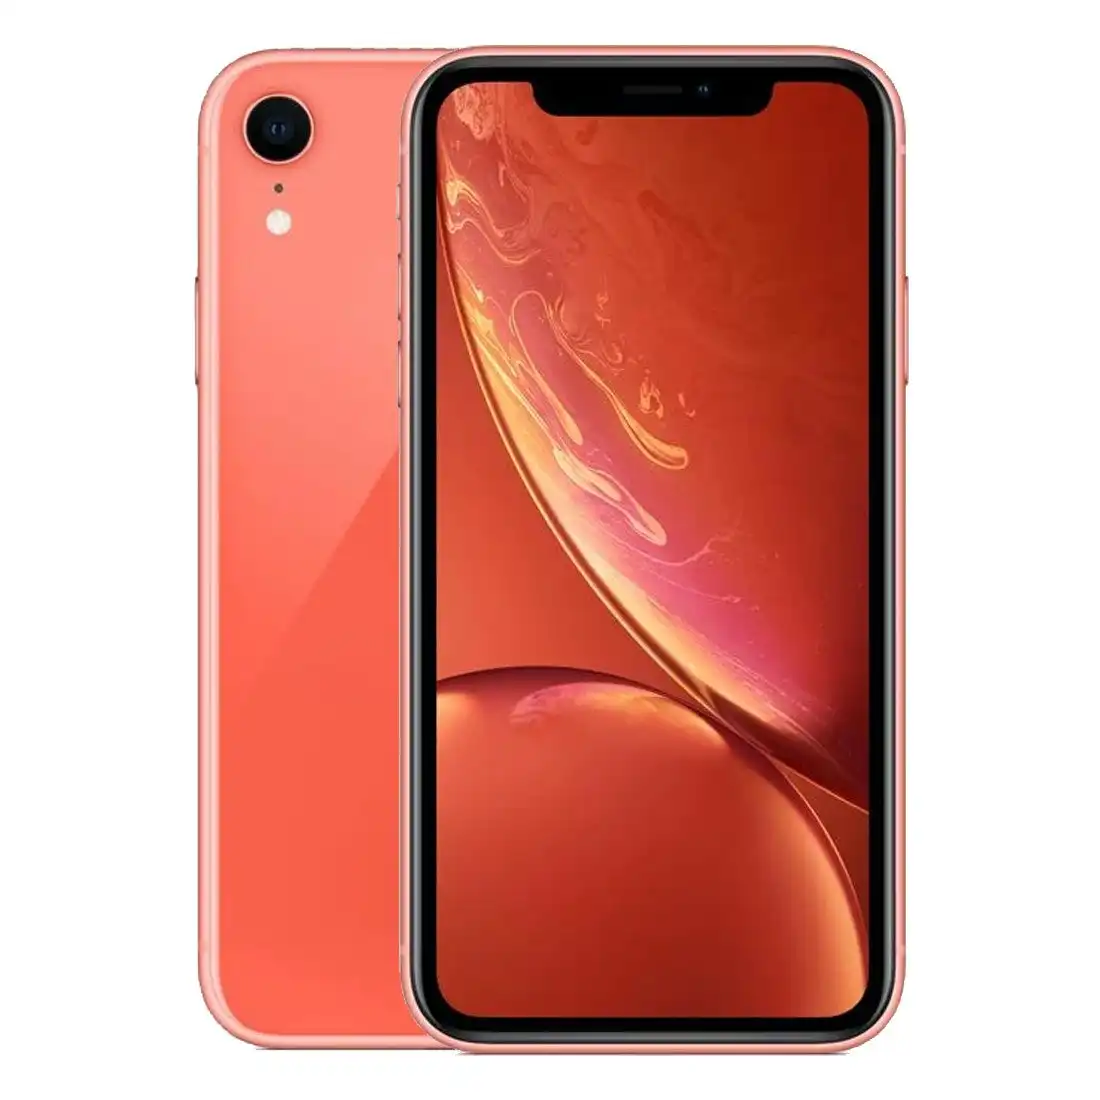 Apple iPhone XR 256GB - Coral [Refurbished] - As New